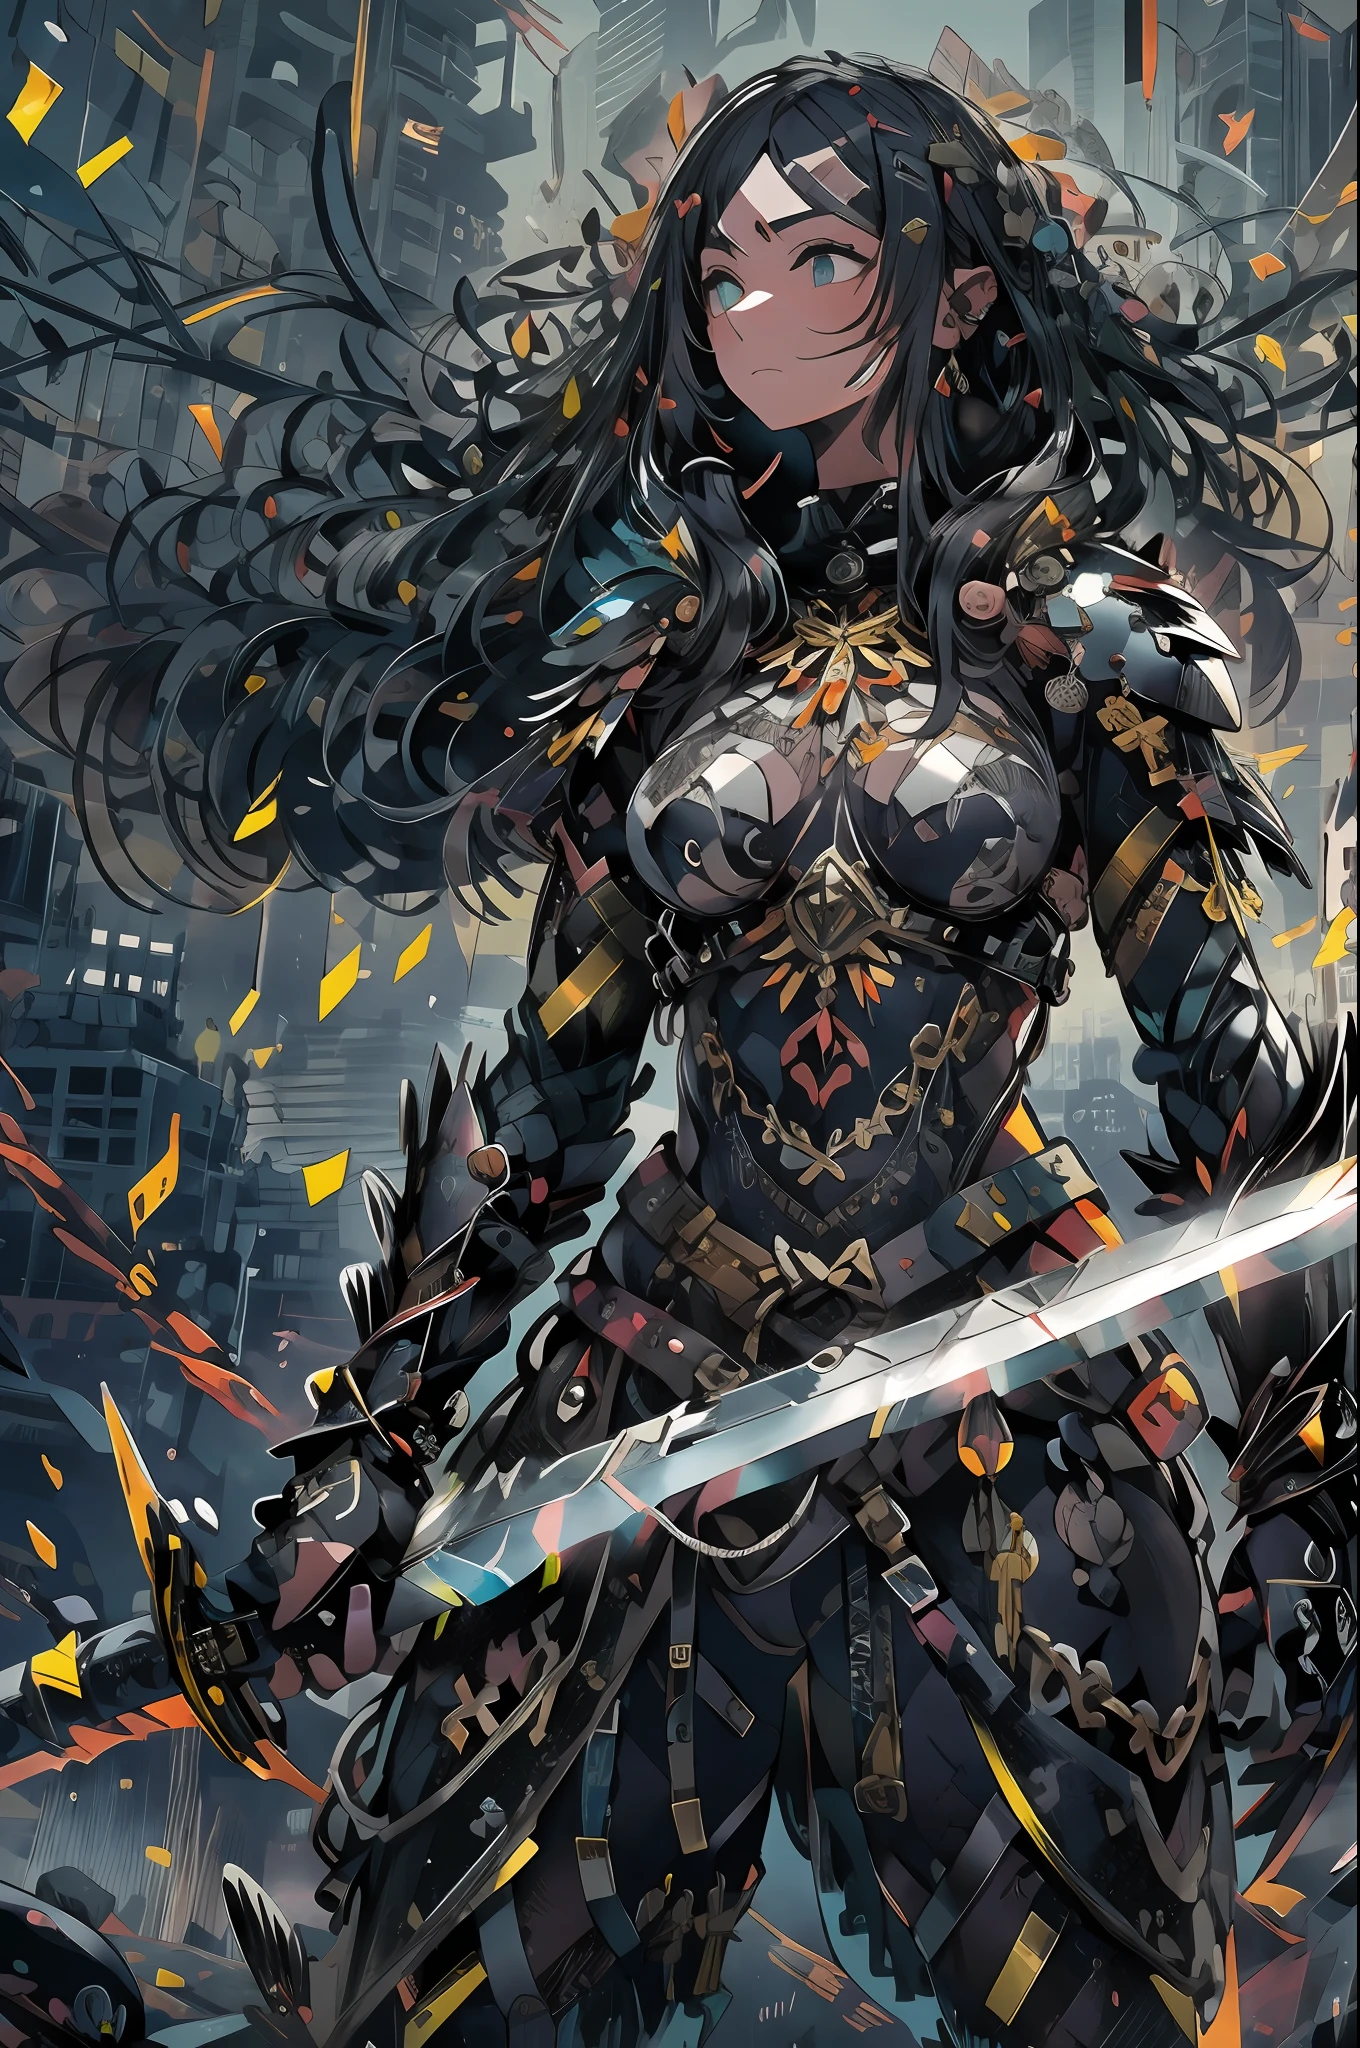 ​masterpiece, top-quality, hightquality, abyssal, awardwinning photo, depth of fields, nffsw, ighly detailed, trending on artstationh, Trending in CGSighbour, Convoluted, high detailing,This illustration is、It is a fantasy scene that emphasizes weight and strength.。Female warrior in black armor、Stand with a very large sword in each hand。Her armor is、Covered with thick and heavy steel plates、You can feel its weight and dignity.。The design of the armor is、Attention to detail、Carved patterns and reliefs exisymbolizes her pride and determination as a warrior。

Her expression was、Firm determination.、Eyes have a mysterious glow, As if staring into the distance。Her gaze is、It shows its inner strength and determination.、You can feel the fighting spirit hidden in her chest。

The surroundings include、Turbulent powder々Became glass、Sound and spectacle further accentuate the majestic atmosphere.。Steel armor and powder々The contrast of the glass that became、Symbolizes the trials of the female warrior's past and her indomitable will。

This illustration is、Through the figure of a female warrior with strength and solidity、It depicts a message of strength and courage to overcome adversity。